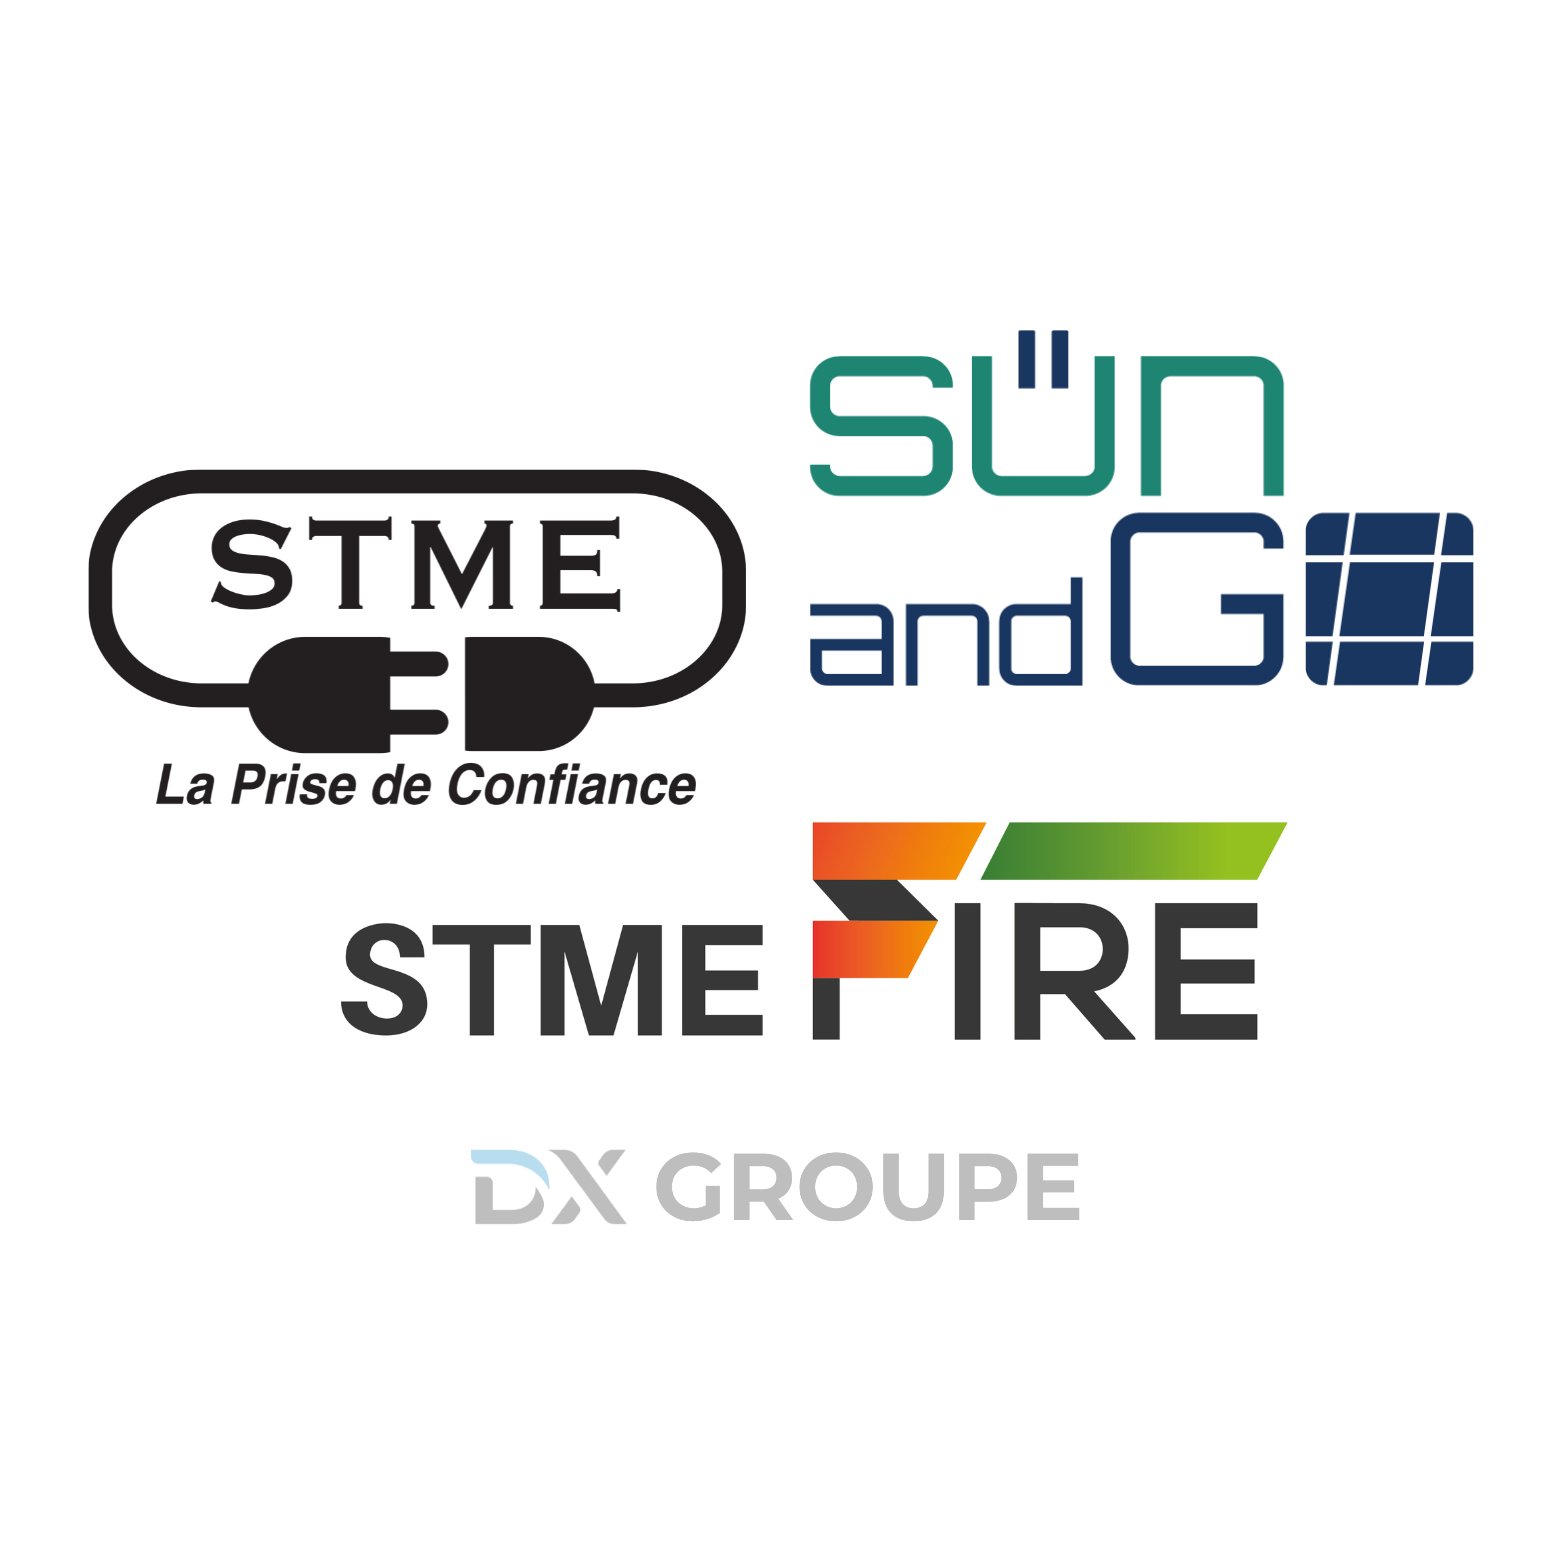 DX GROUPE